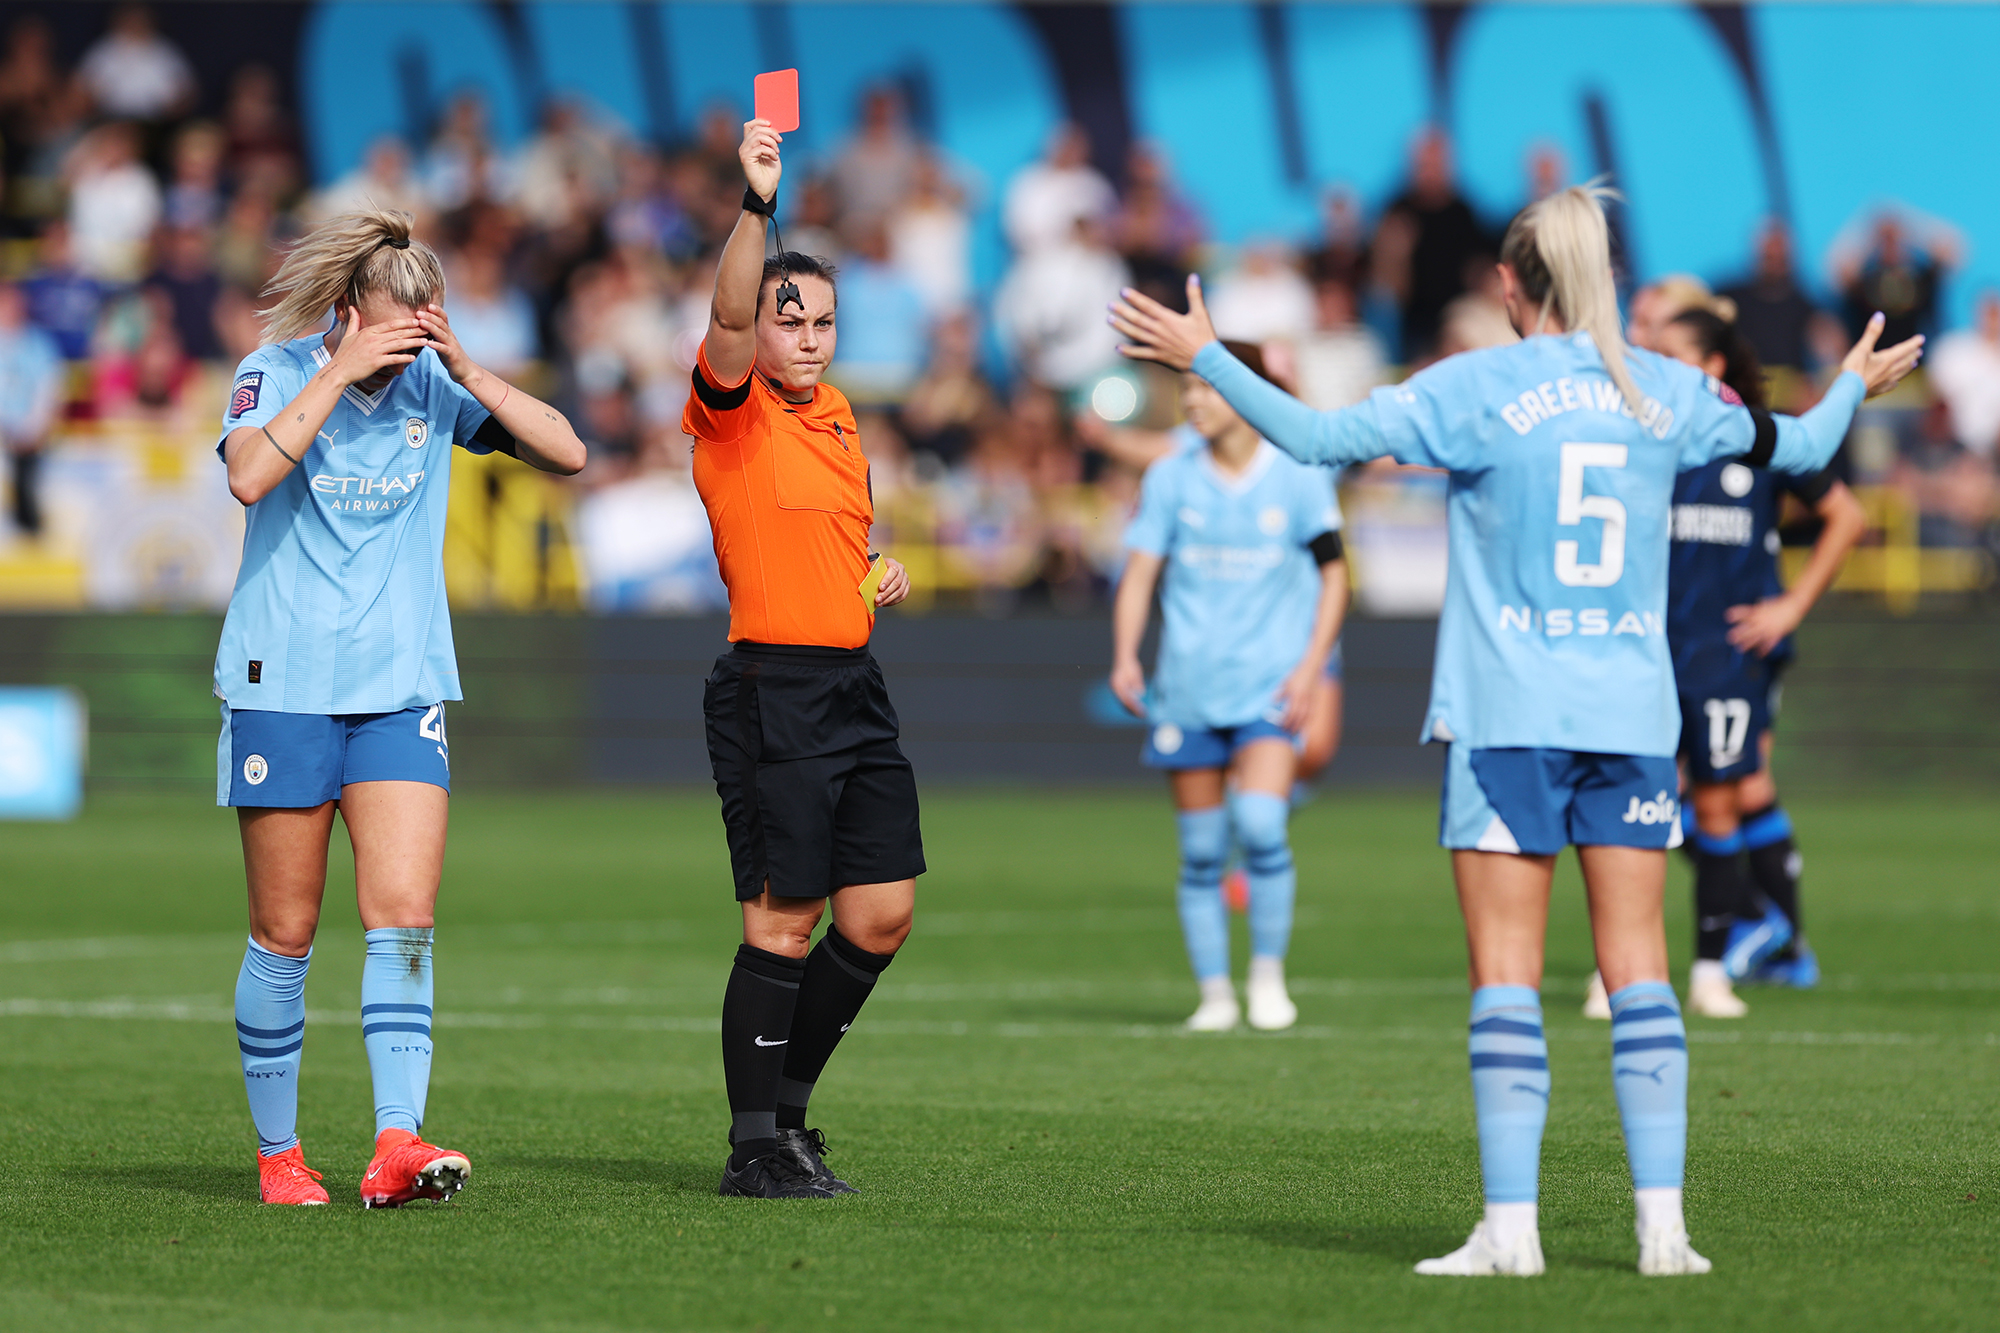 Man City's Alex Greenwood receives a controversial red card for time-wasting in the game against Chelsea